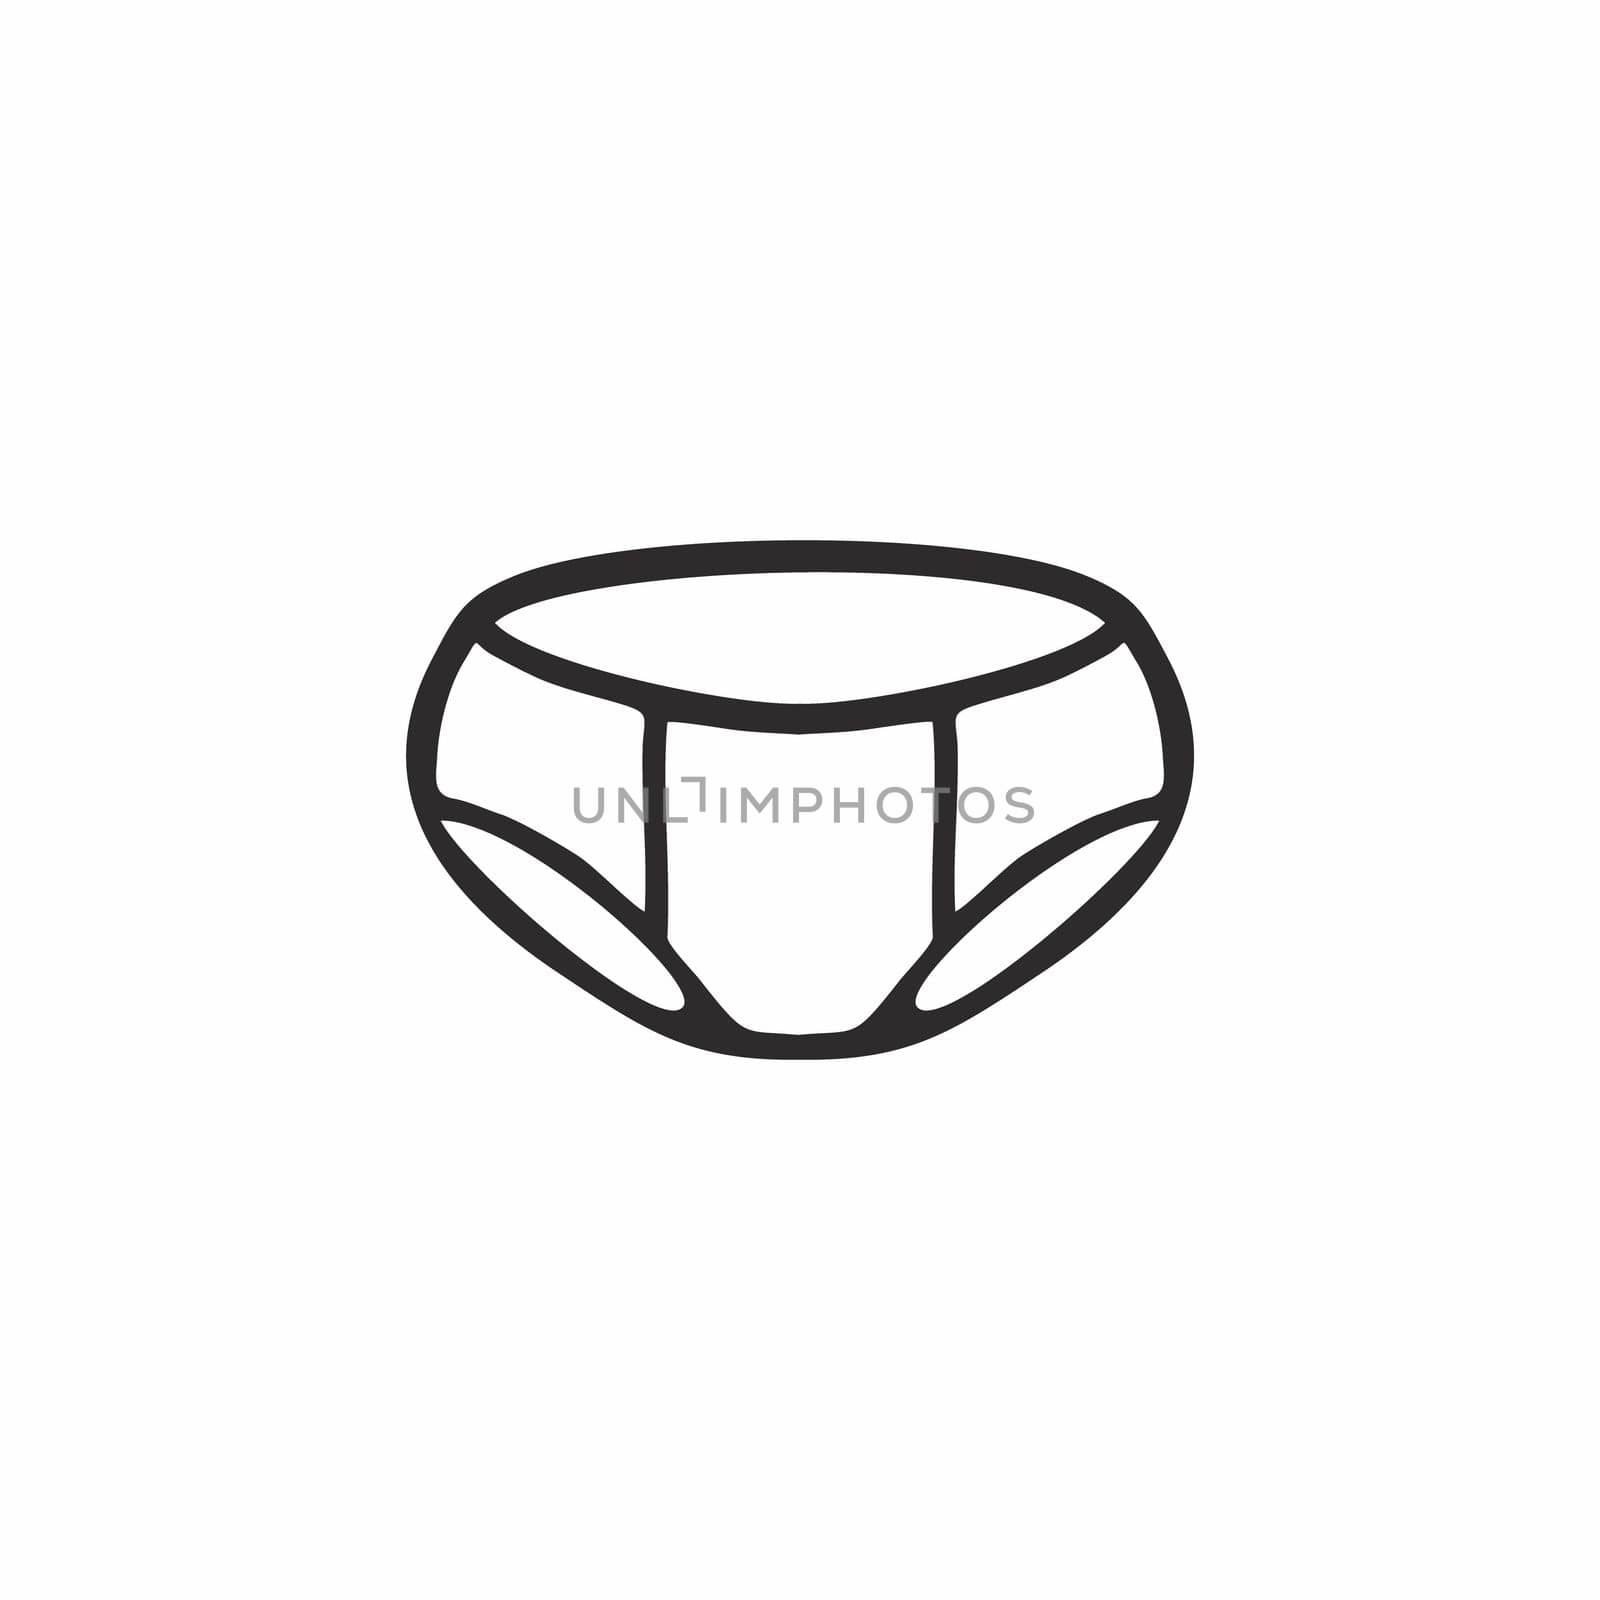 Children's underwear for boys and girls. Contour illustration on intimate hygiene, body care, and children's clothing. Diapers for newborns. Doodle icon for a website with children's products.